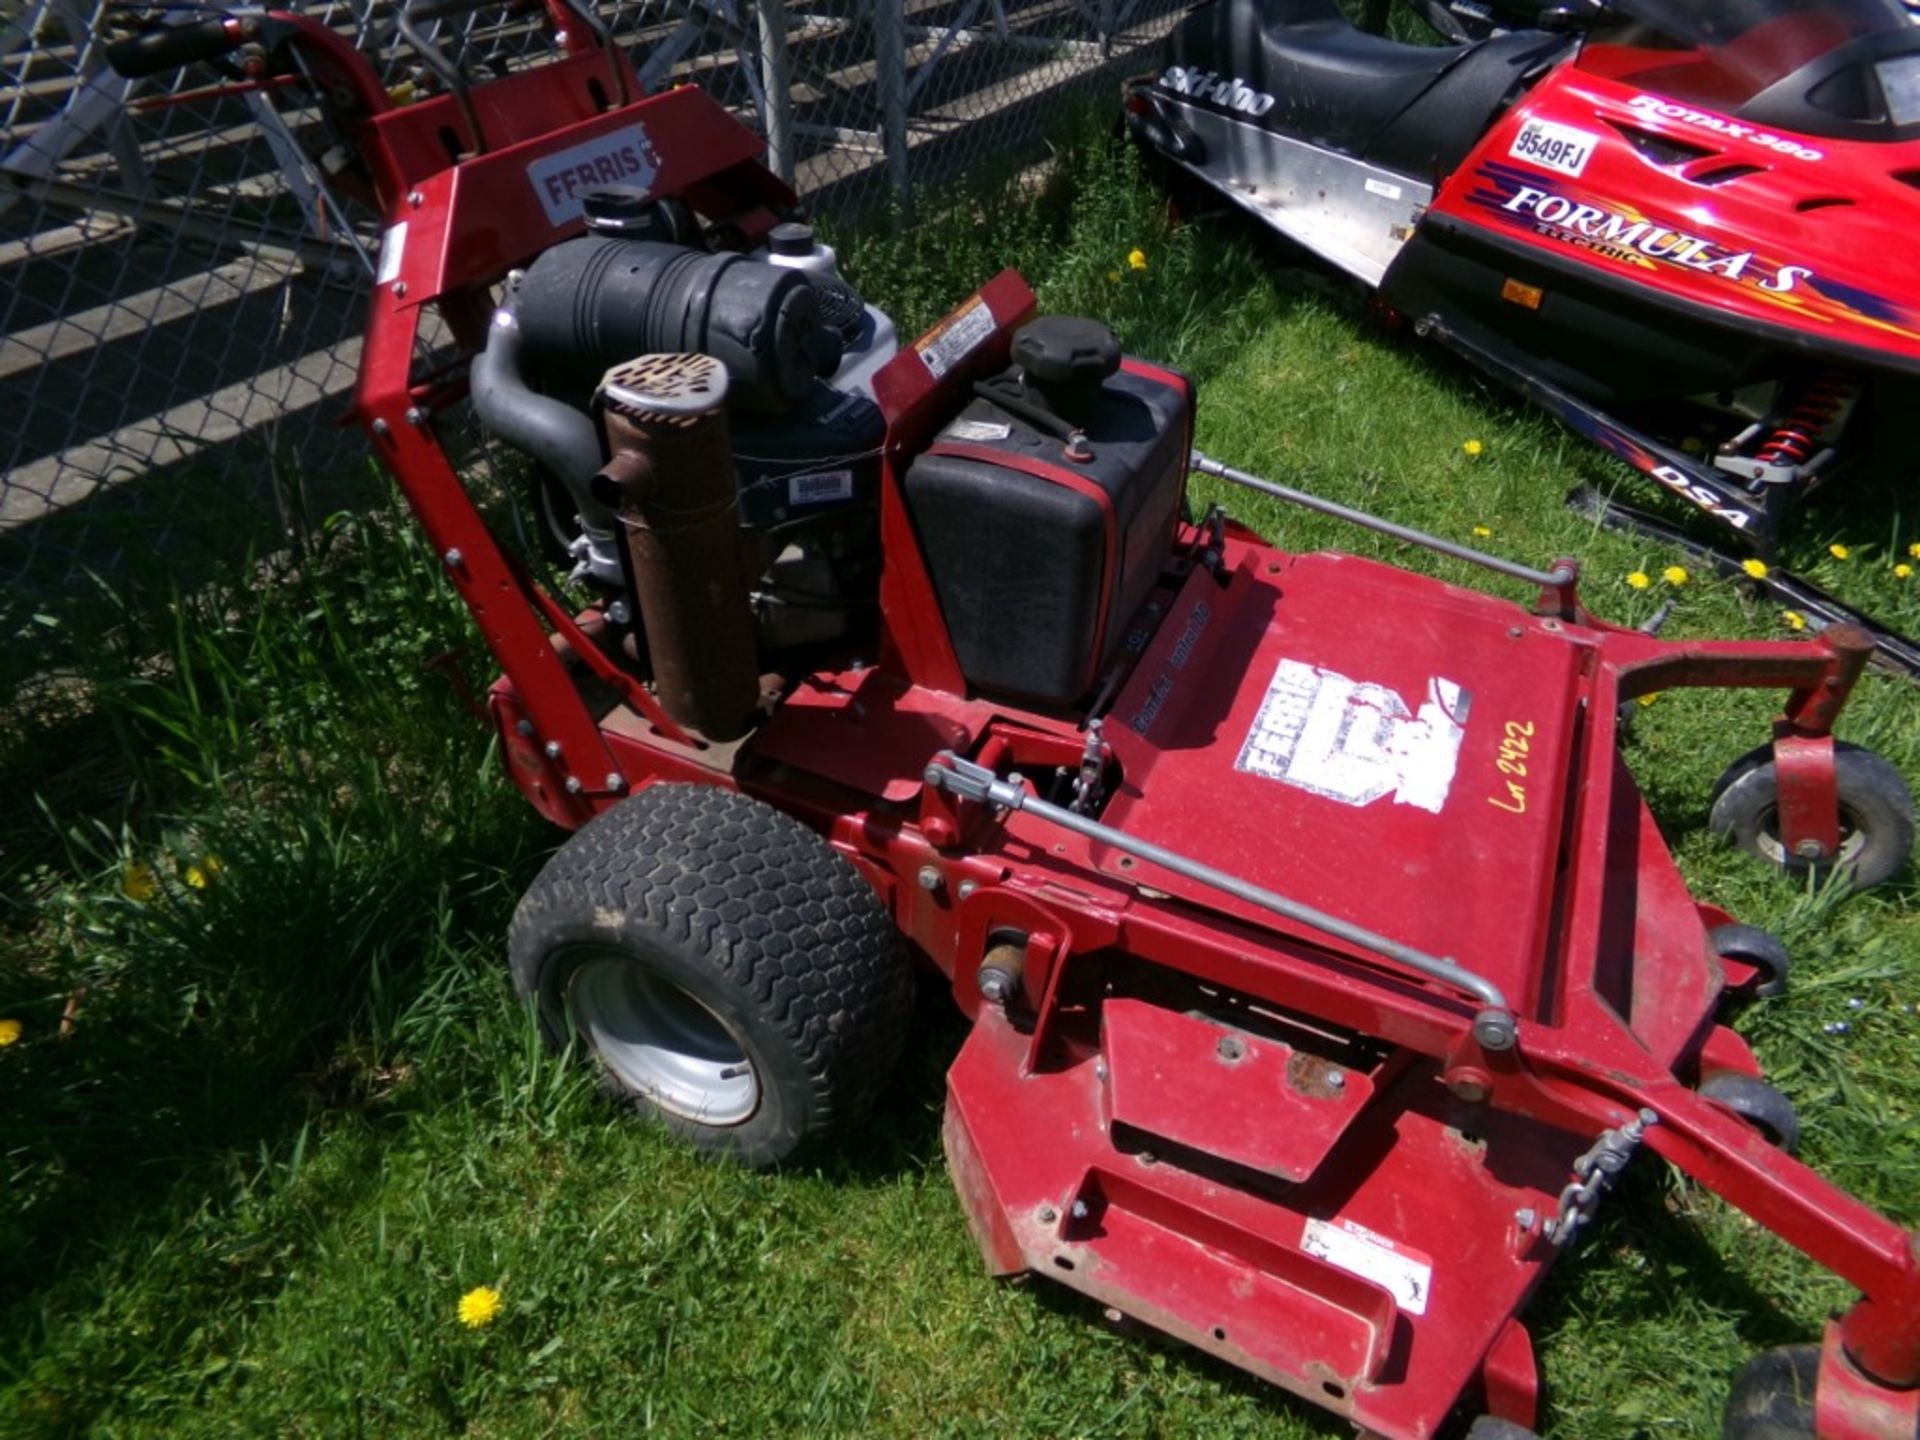 Ferris Commercial Walk Behind Mower with 52'' Deck and Kawasaki V-Twin, Runs and Works Good (5019) - Image 2 of 2